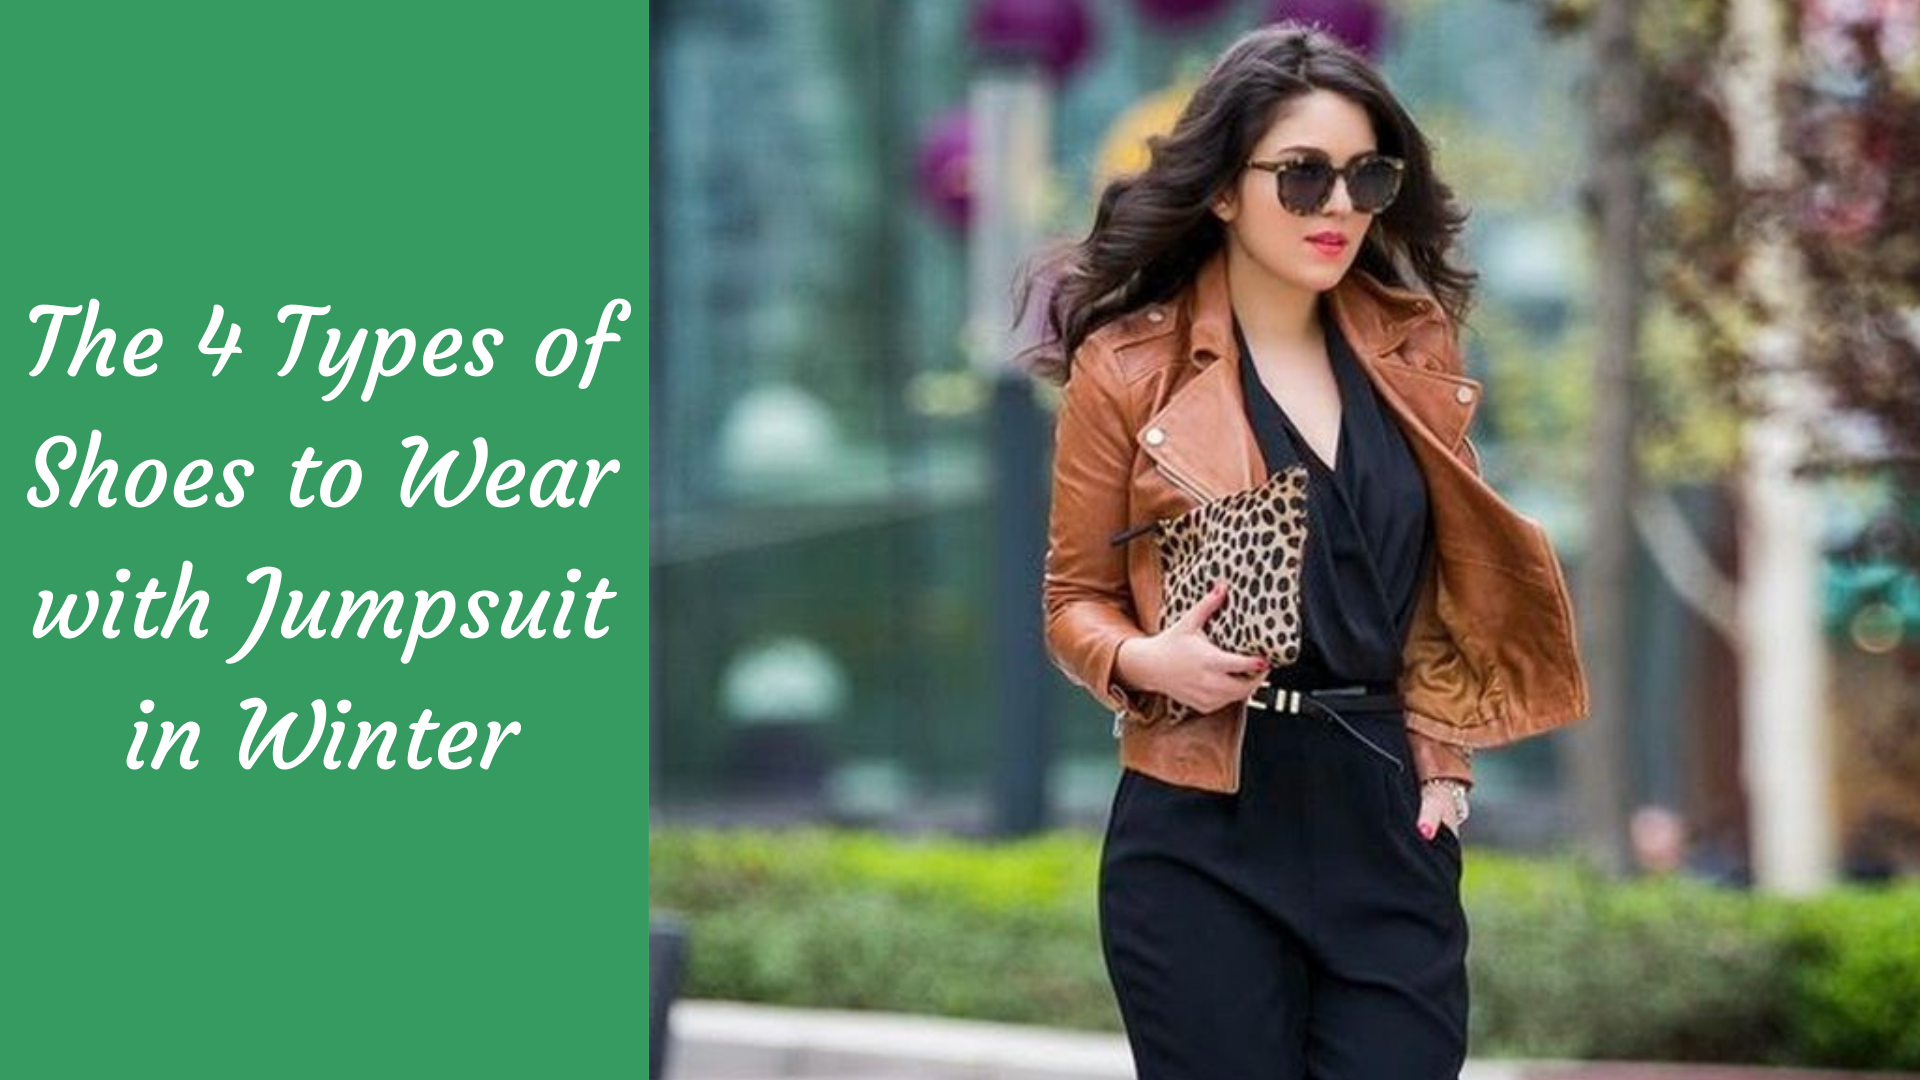 The 4 Types of Shoes to Wear with Jumpsuit in Winter - The Kosha Journal